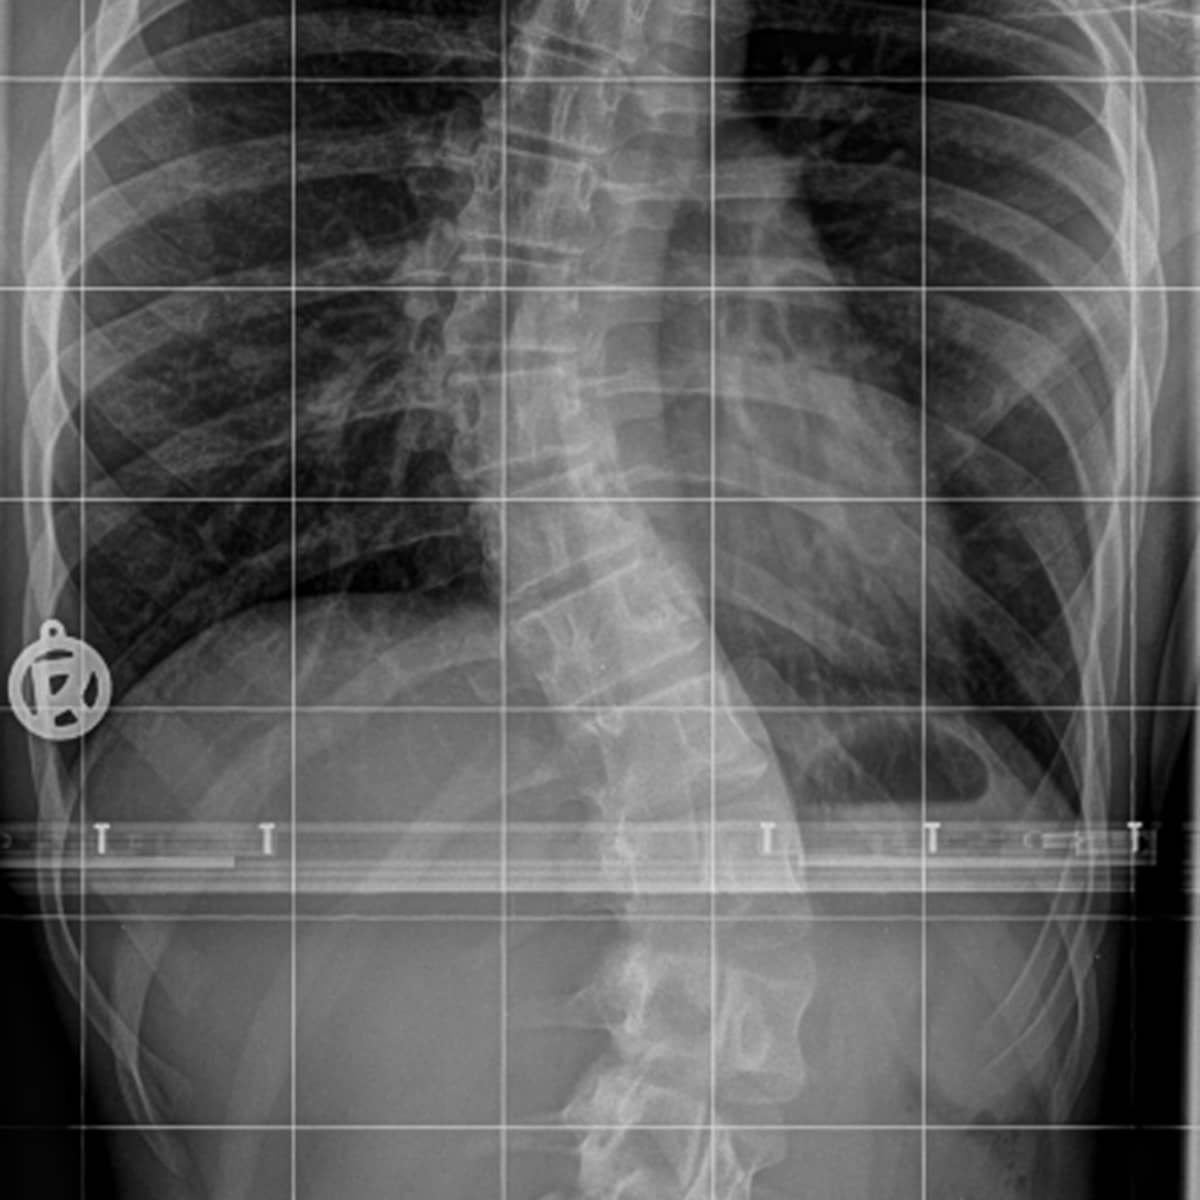 Pillow of Scoliosis of the spine, X-ray C016 / 6566